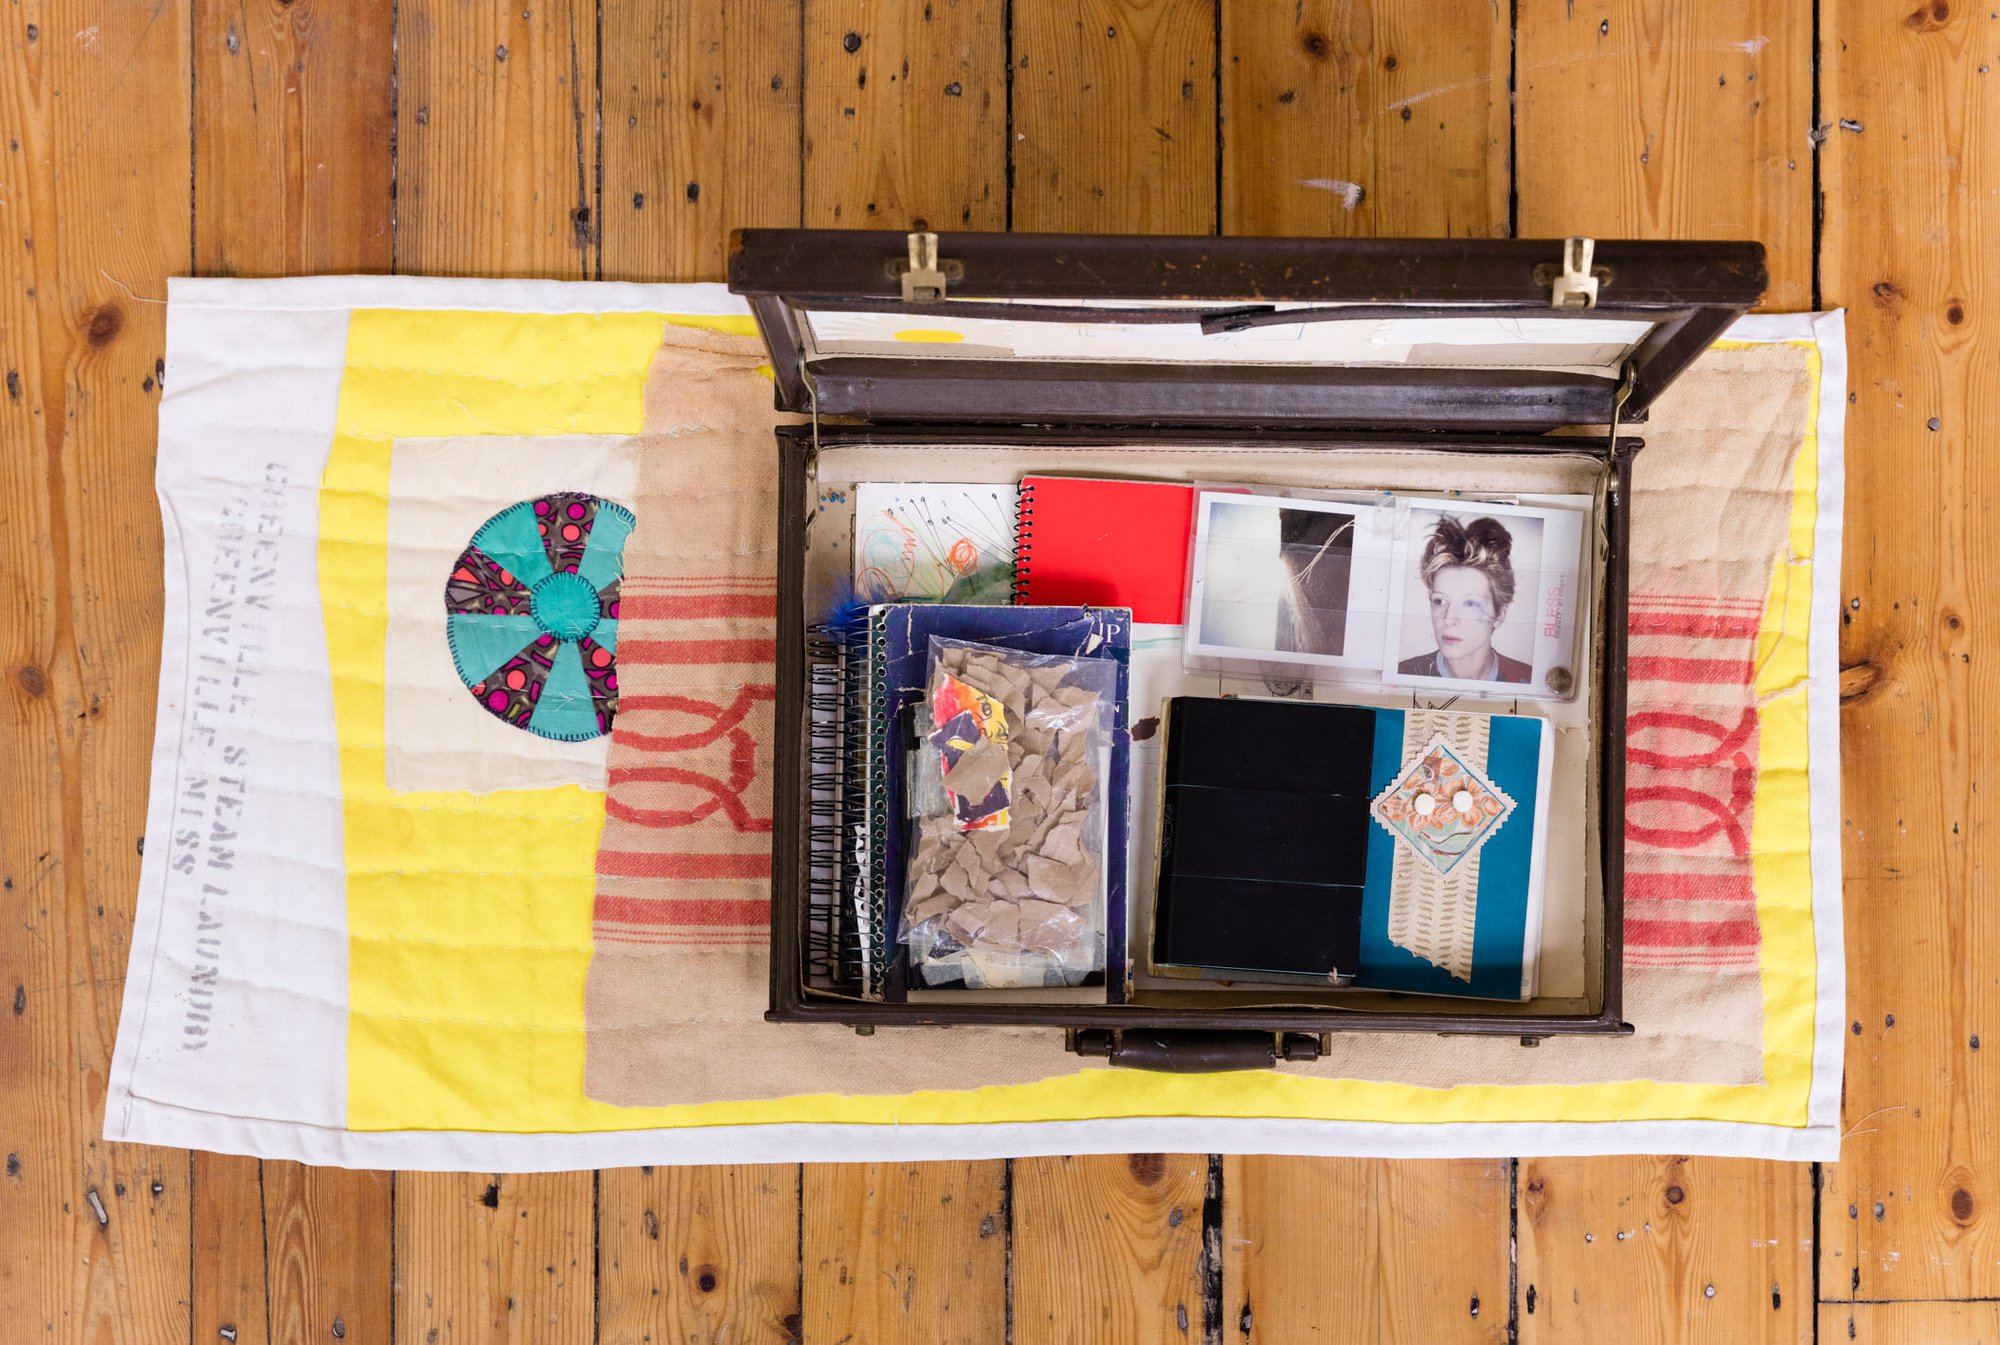 Susan Cianciolo, Briefcase Kit, briefcase, ink and pencil on paper, torn brown paper in plastic bag, archival books from: Love Life, Run 8, Run 10, Small Things &amp; Games and Museum for Moderne Kunst Costumes [book] on handmade quilt by Coulter Fussell, 40.64 x 46.99 x 96.52 cm (16 x 18 1/2 x 38 in), 1997 – 2015